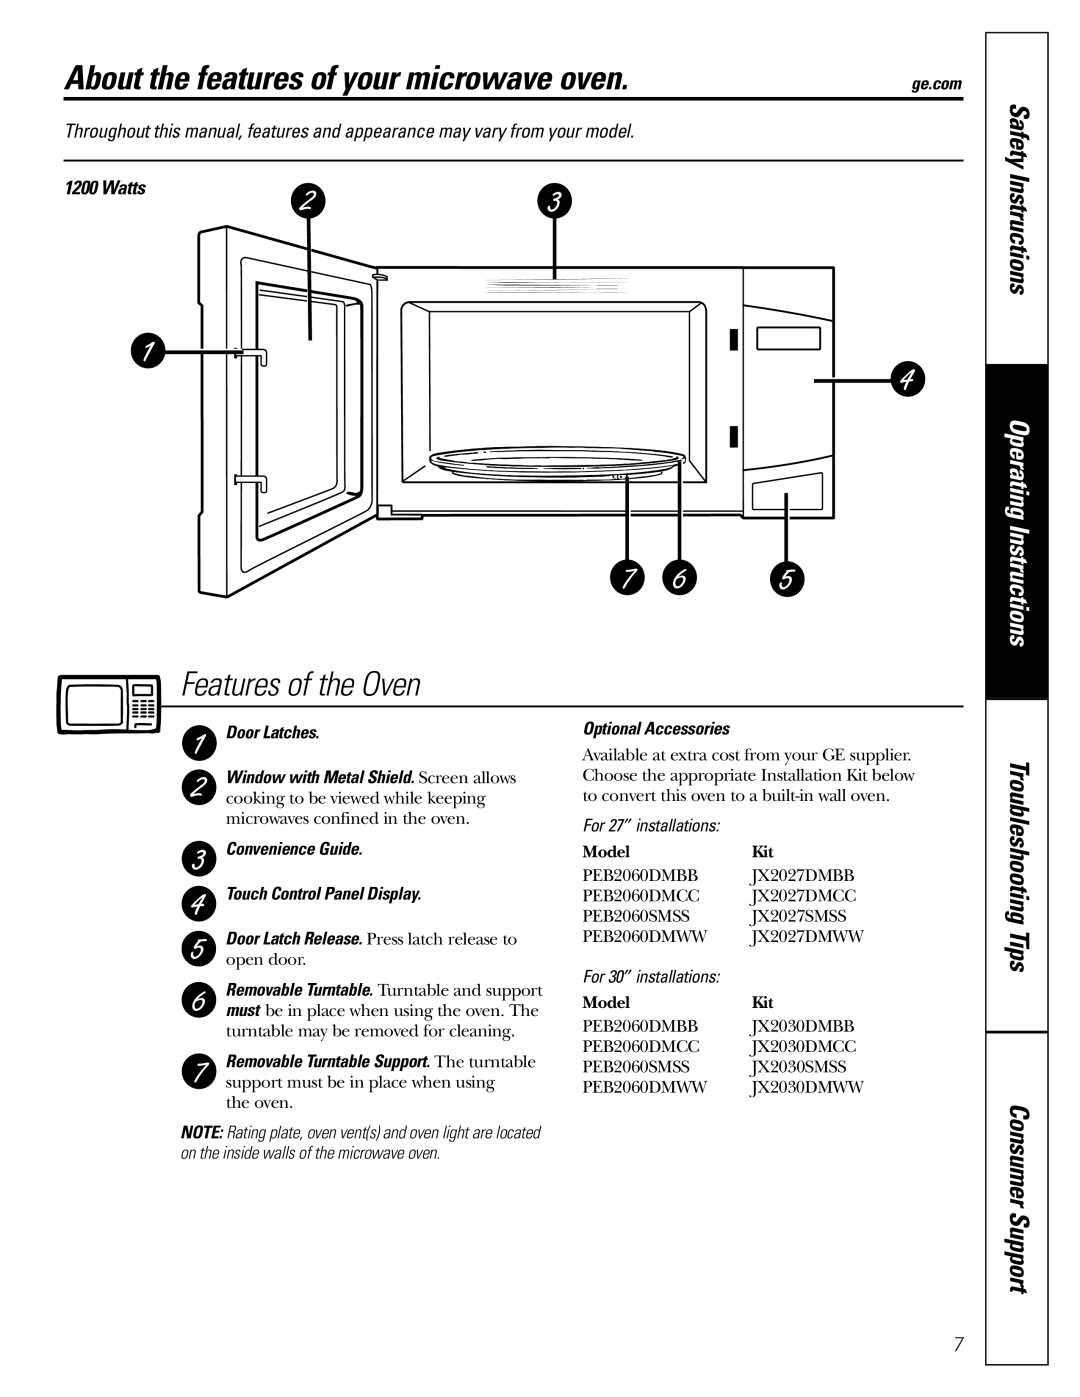 GE PEB2060 About the features of your microwave oven, Features of the Oven, Safety Instructions, Operating Instructions 